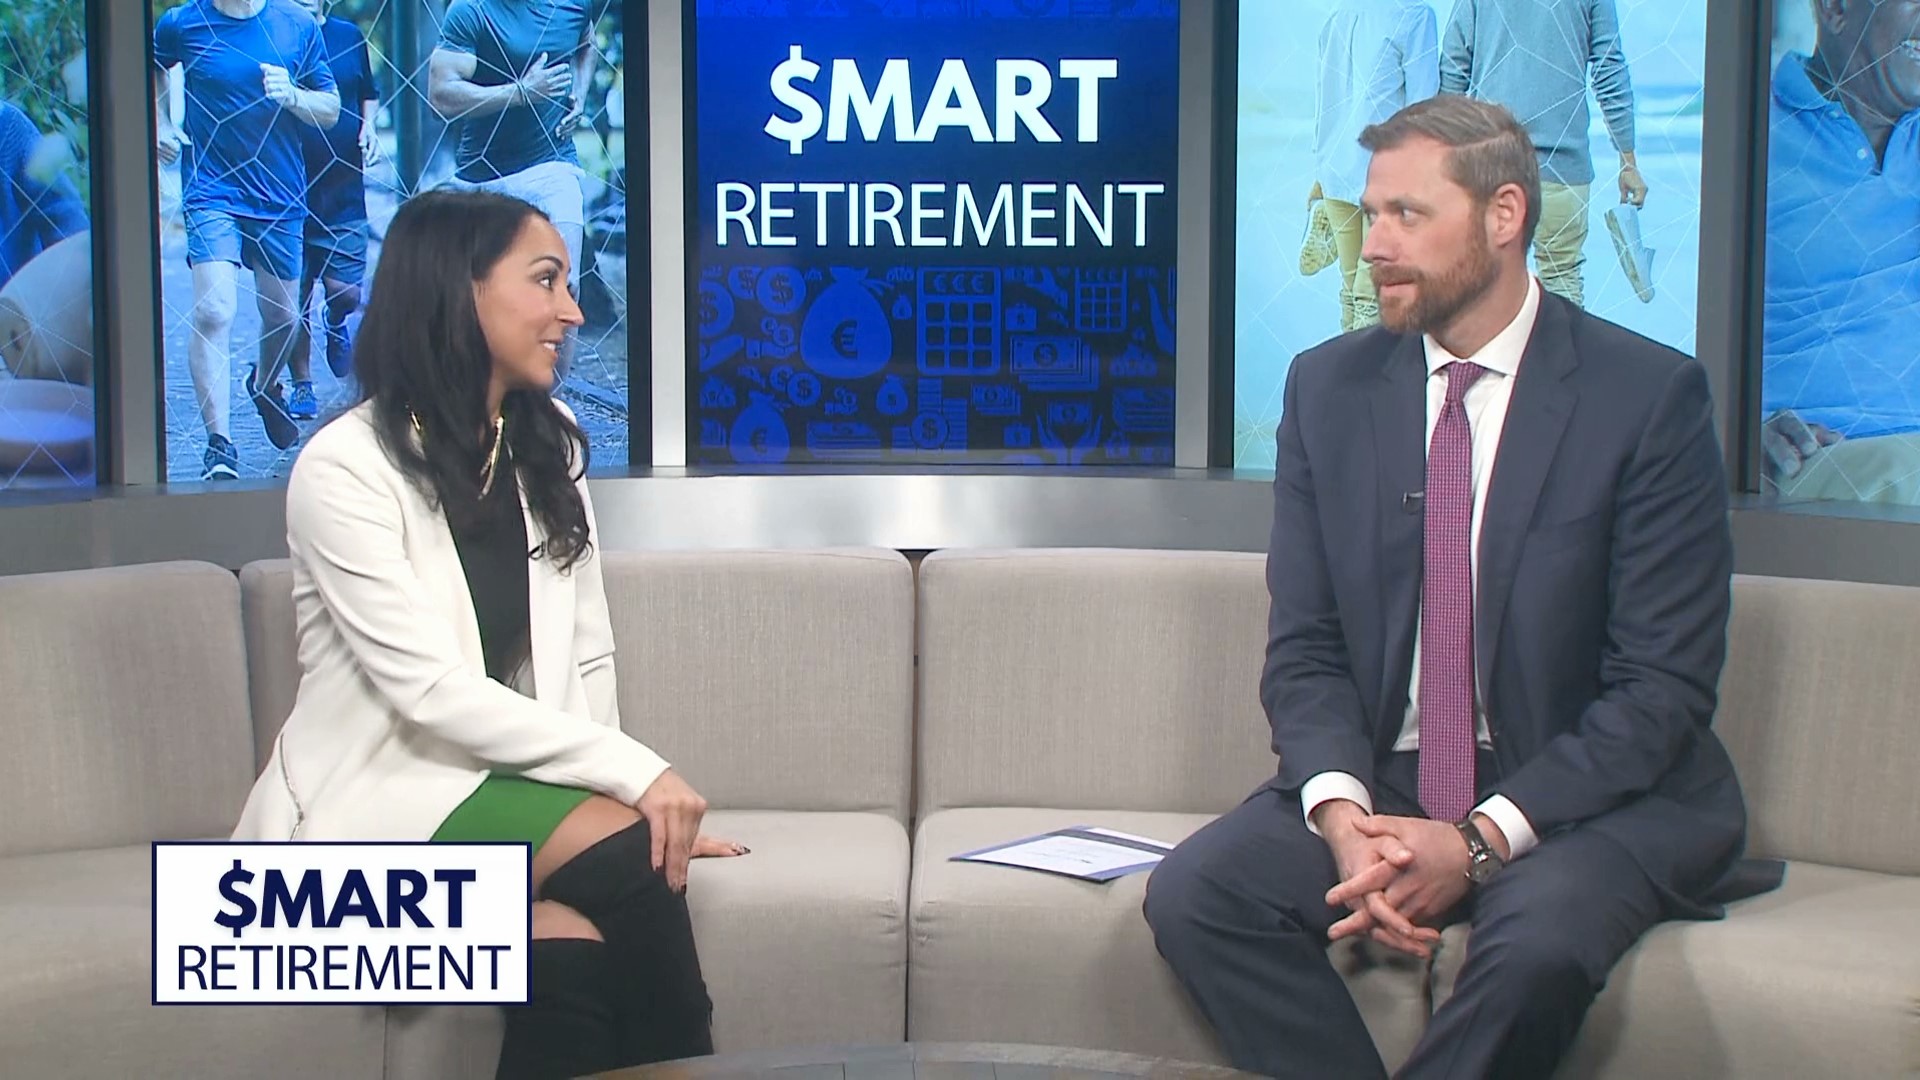 Will I have enough money for retirement - Smart Retirement